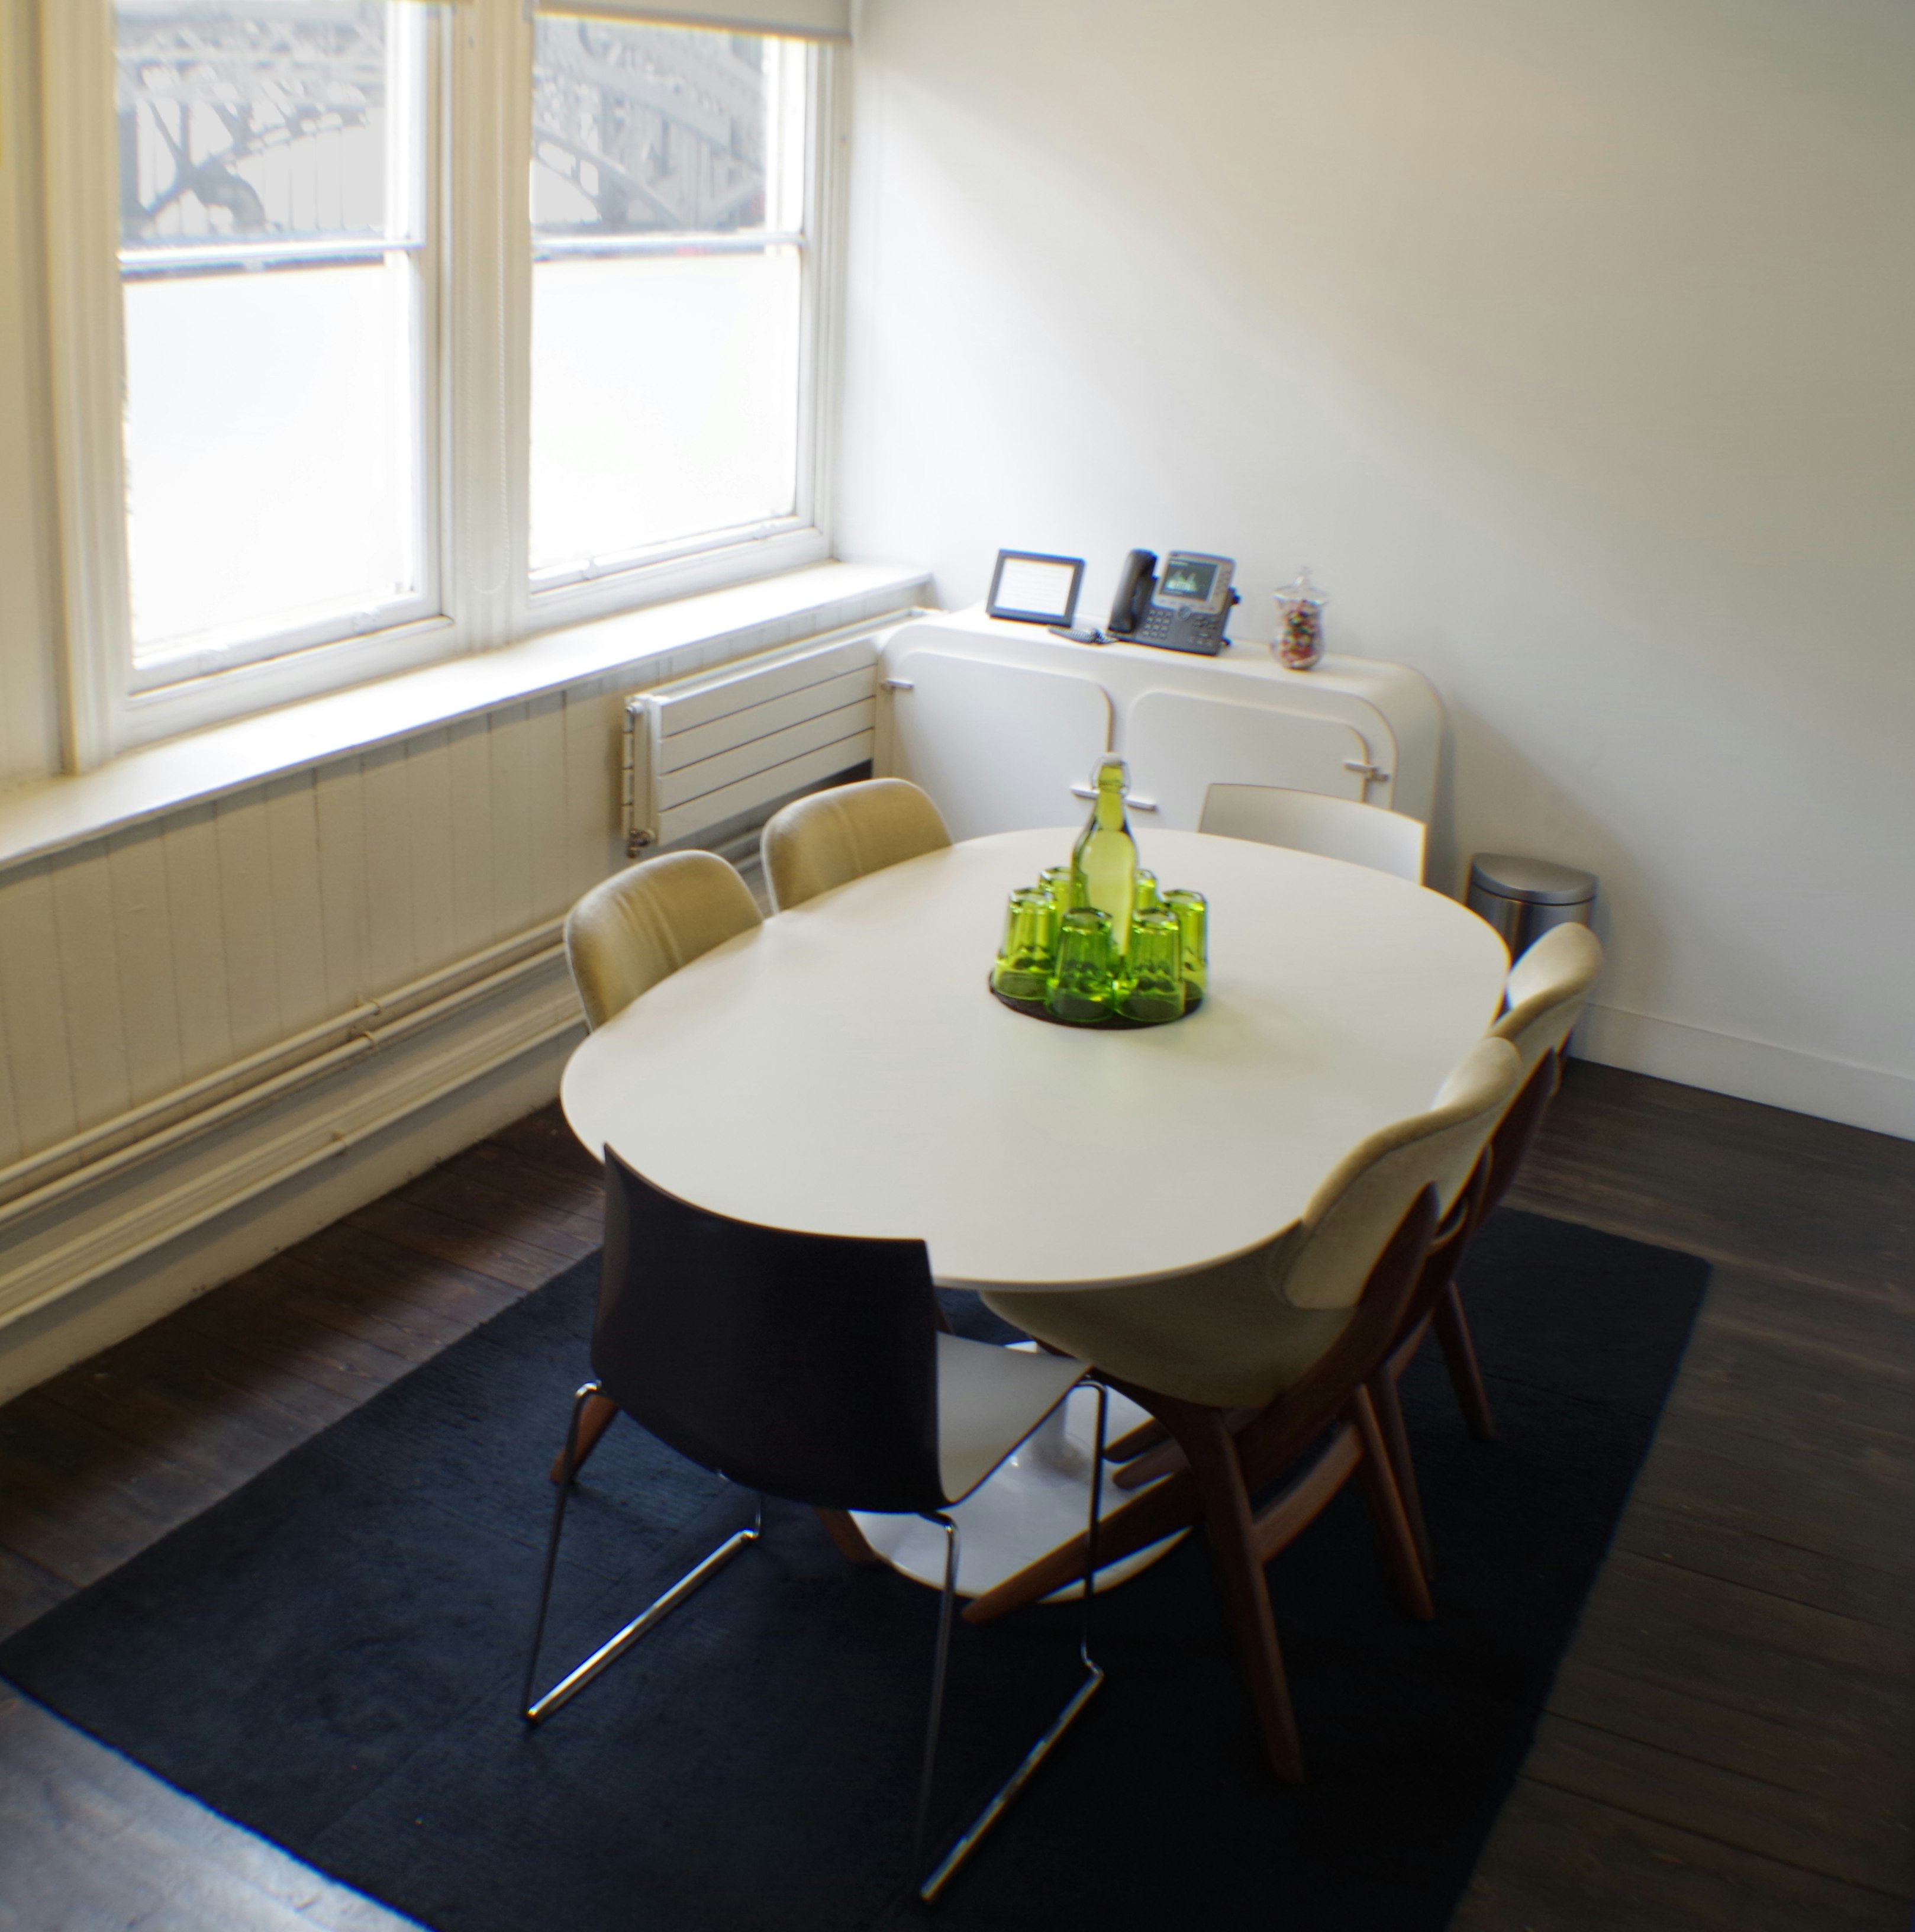 Cheap Meeting Rooms Venues in London - The Office Group Marylebone Station